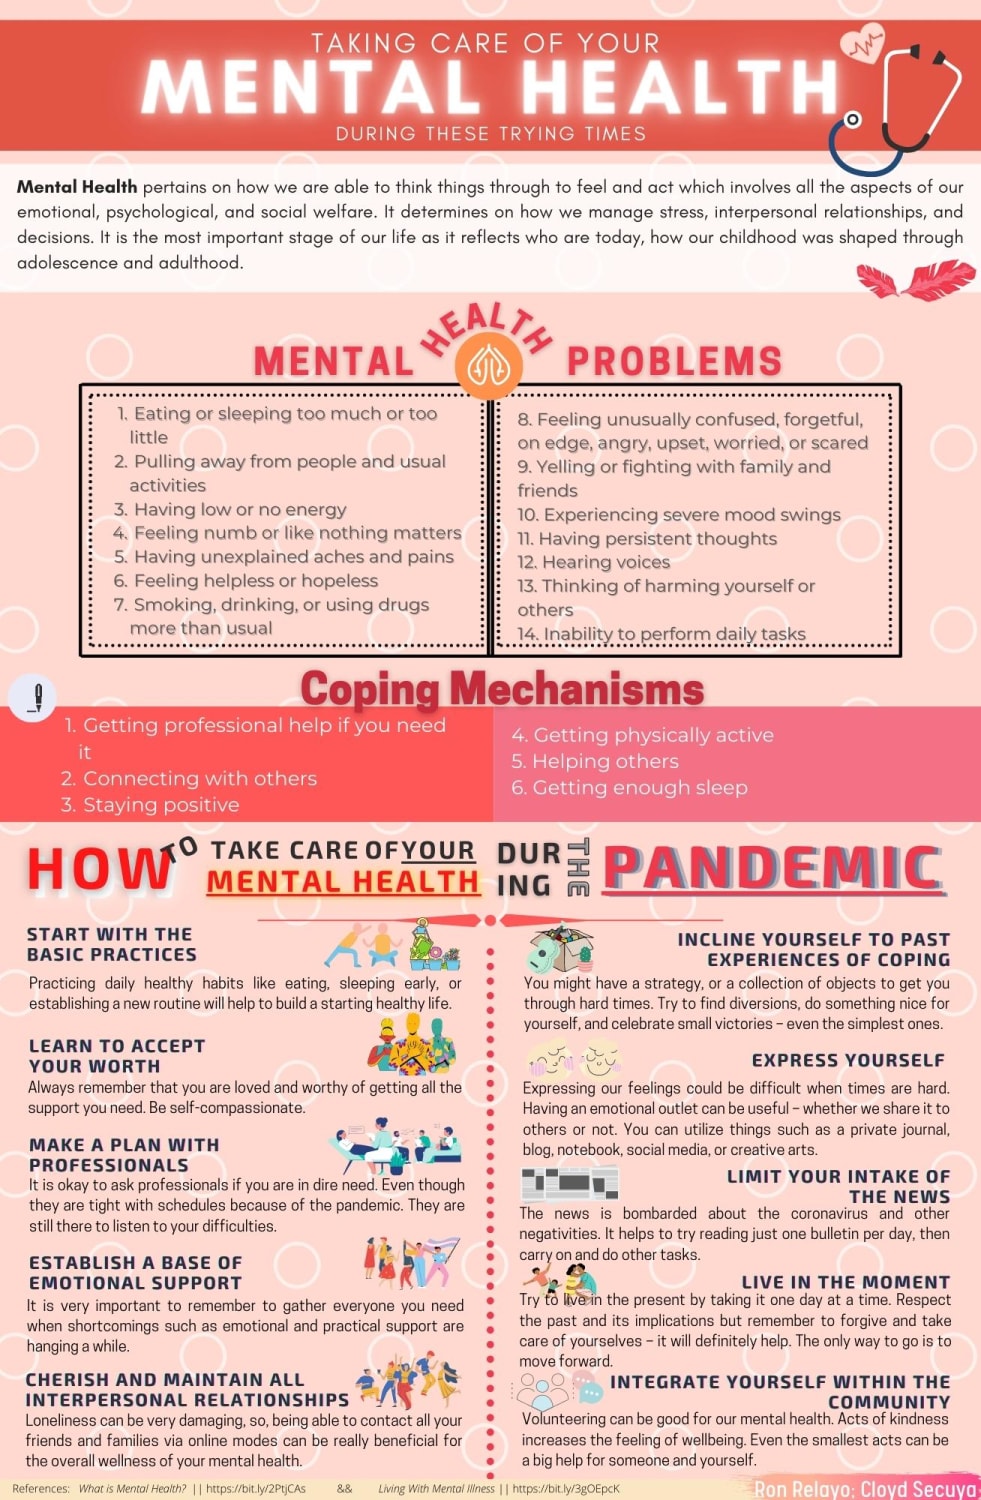 Taking care of your mental health during these trying times. A guide made by me and my friend.